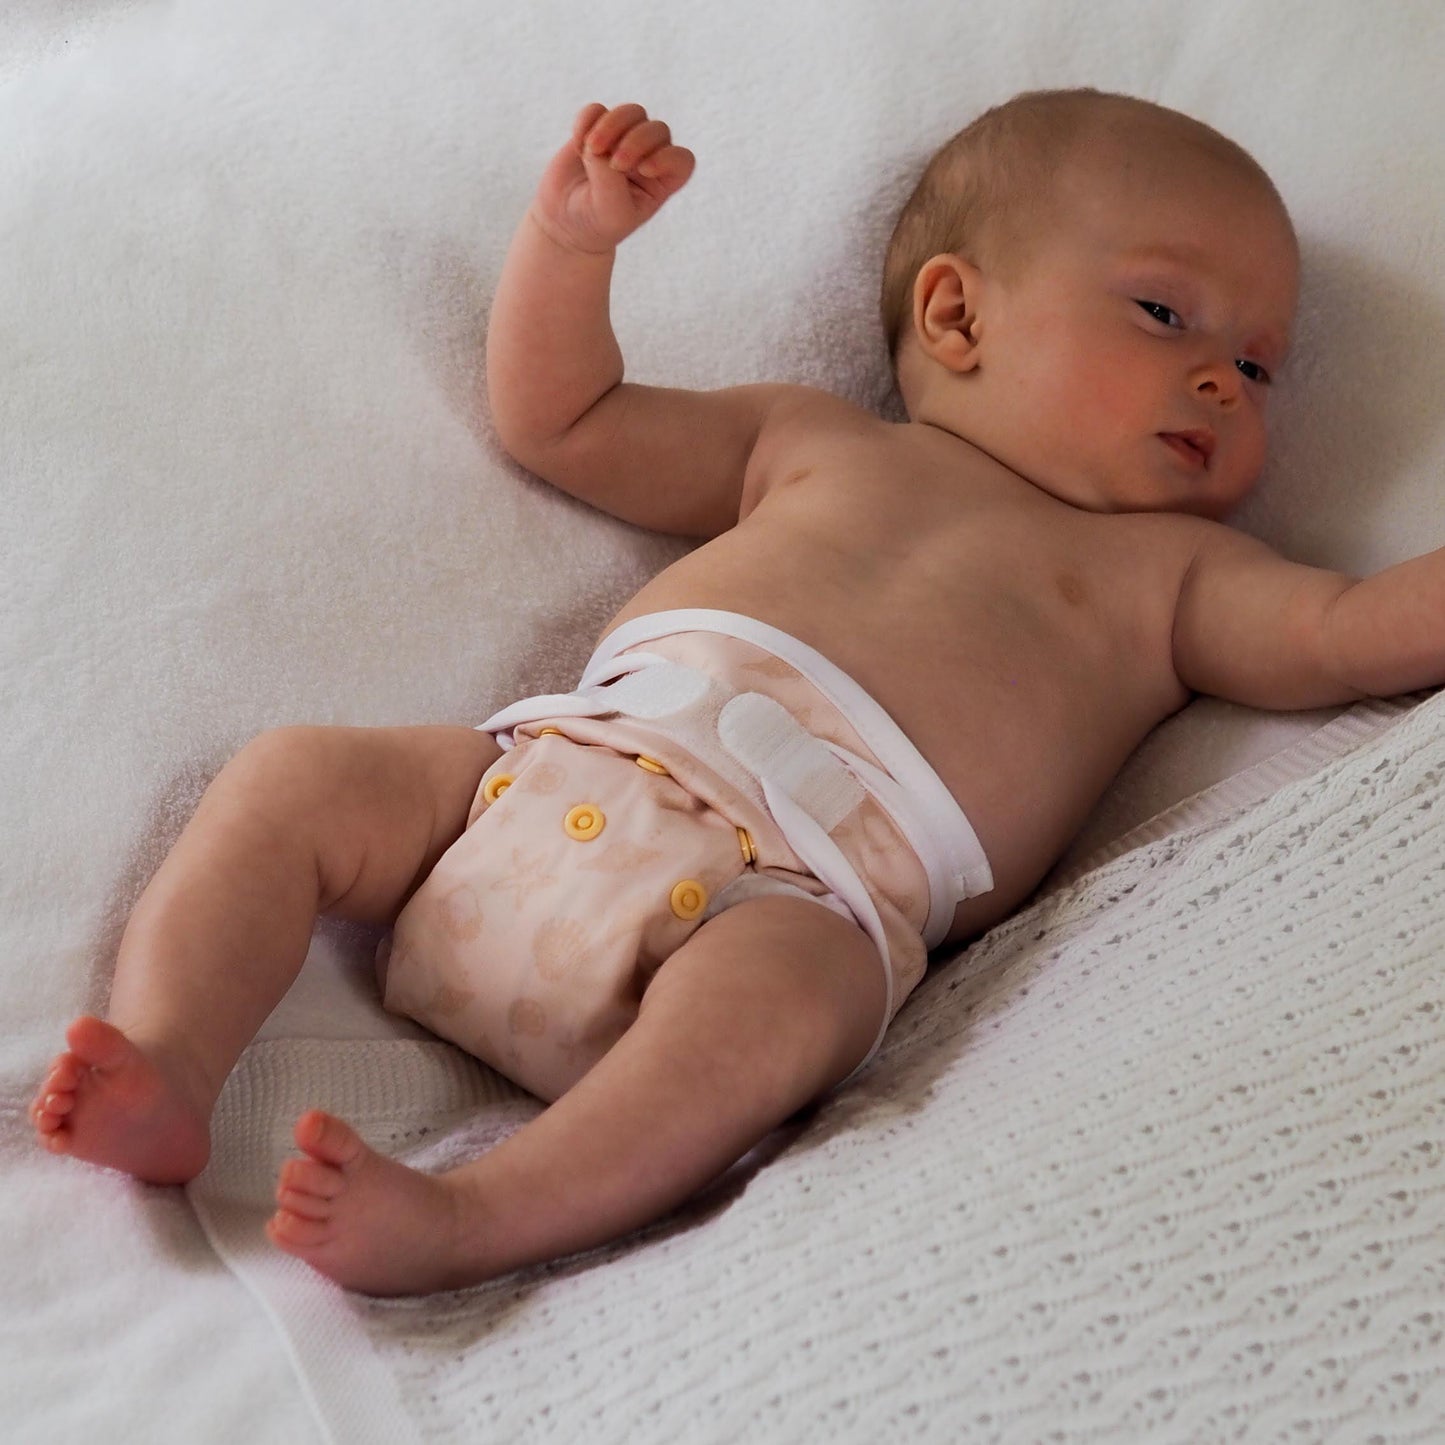 Nappy Lady: The UK's Largest Range of Reusable Nappies